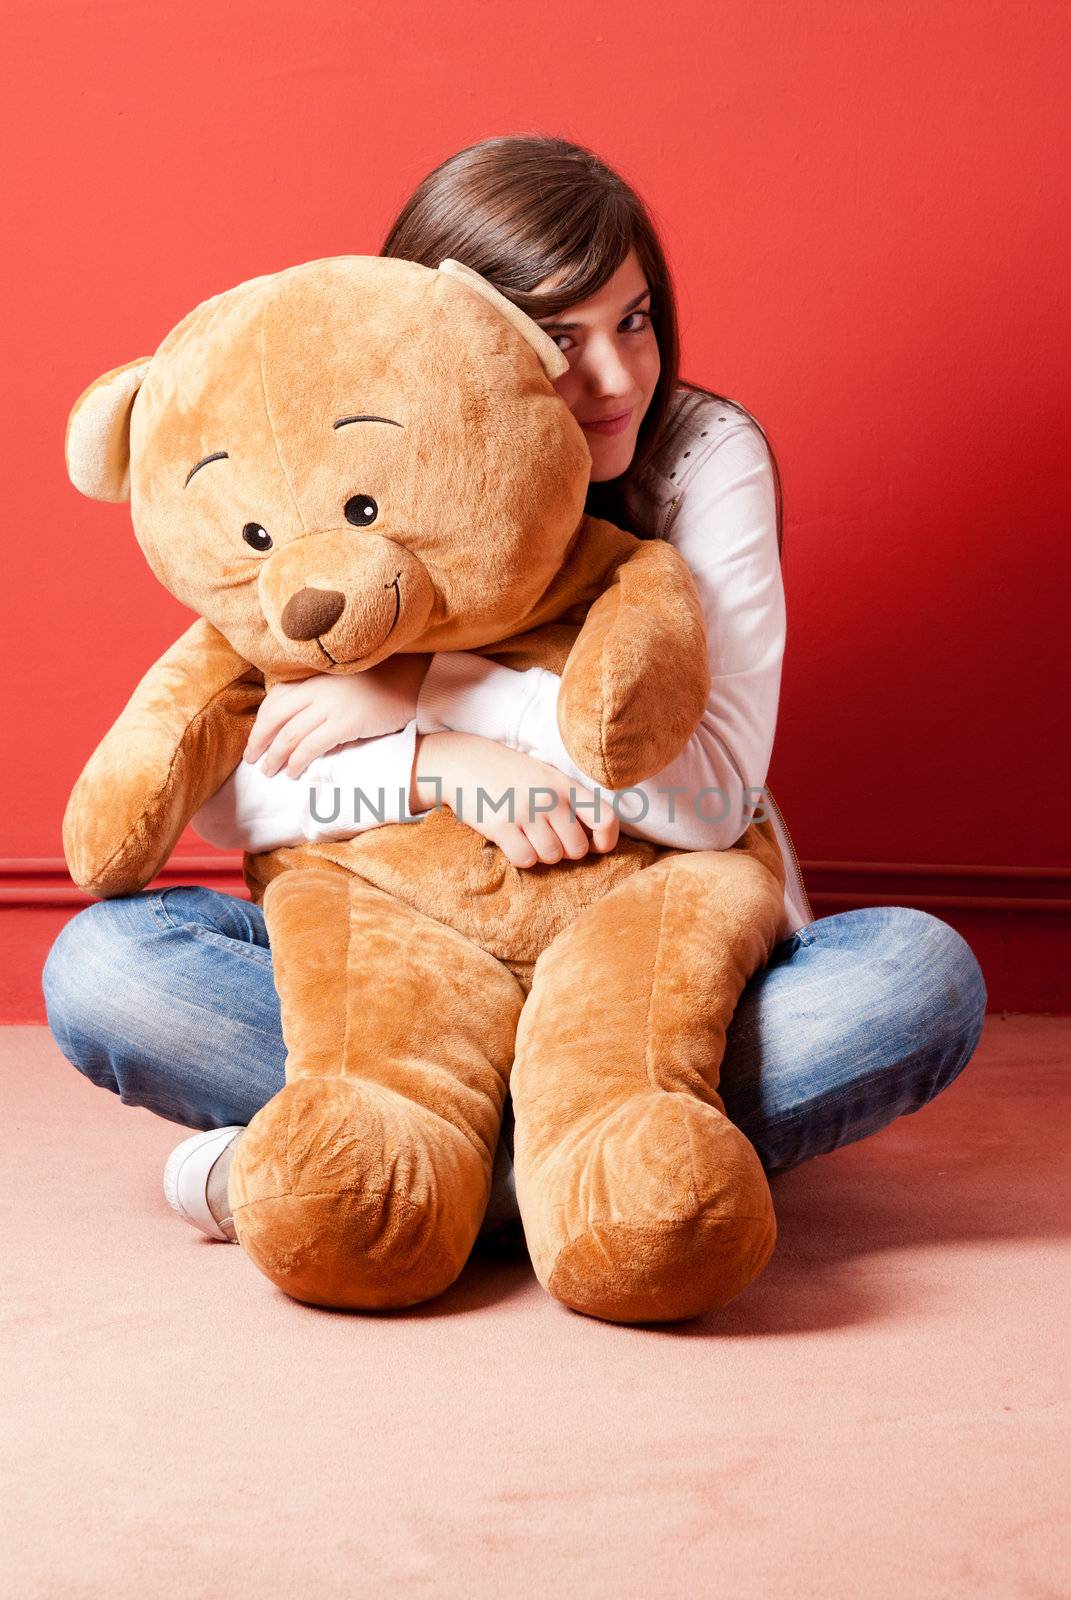 Young woman embracing teddy bear sitting on floor by dgmata